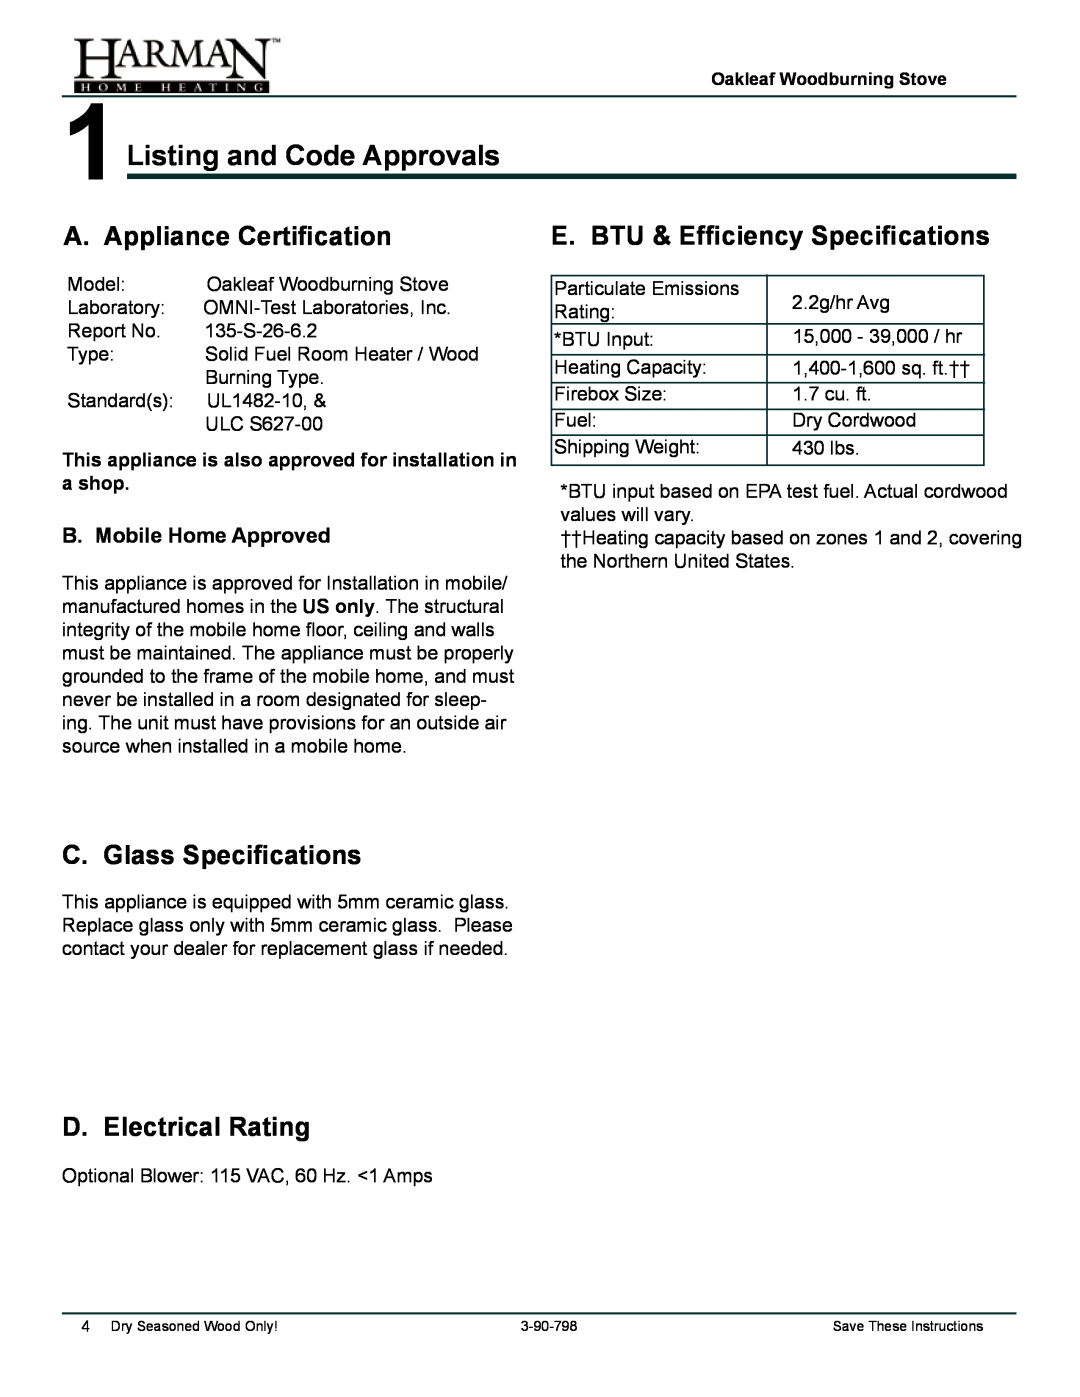 Harman Stove Company 1-90-797000 manual 1Listing and Code Approvals, A. Appliance Certification, C. Glass Specifications 